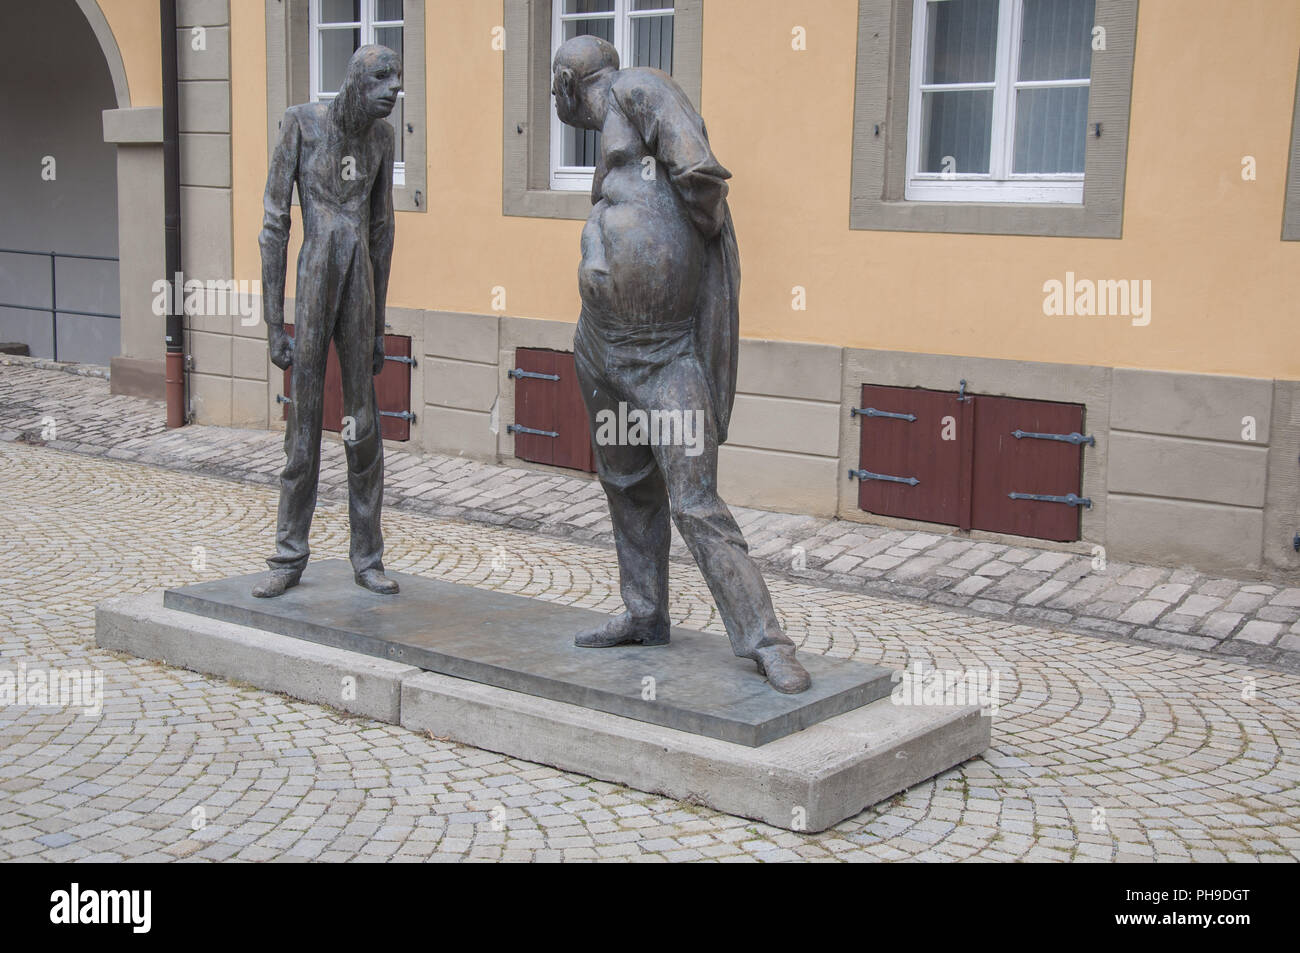 Sculptures in the Old-Town of Weikersheim, Germany Stock Photo